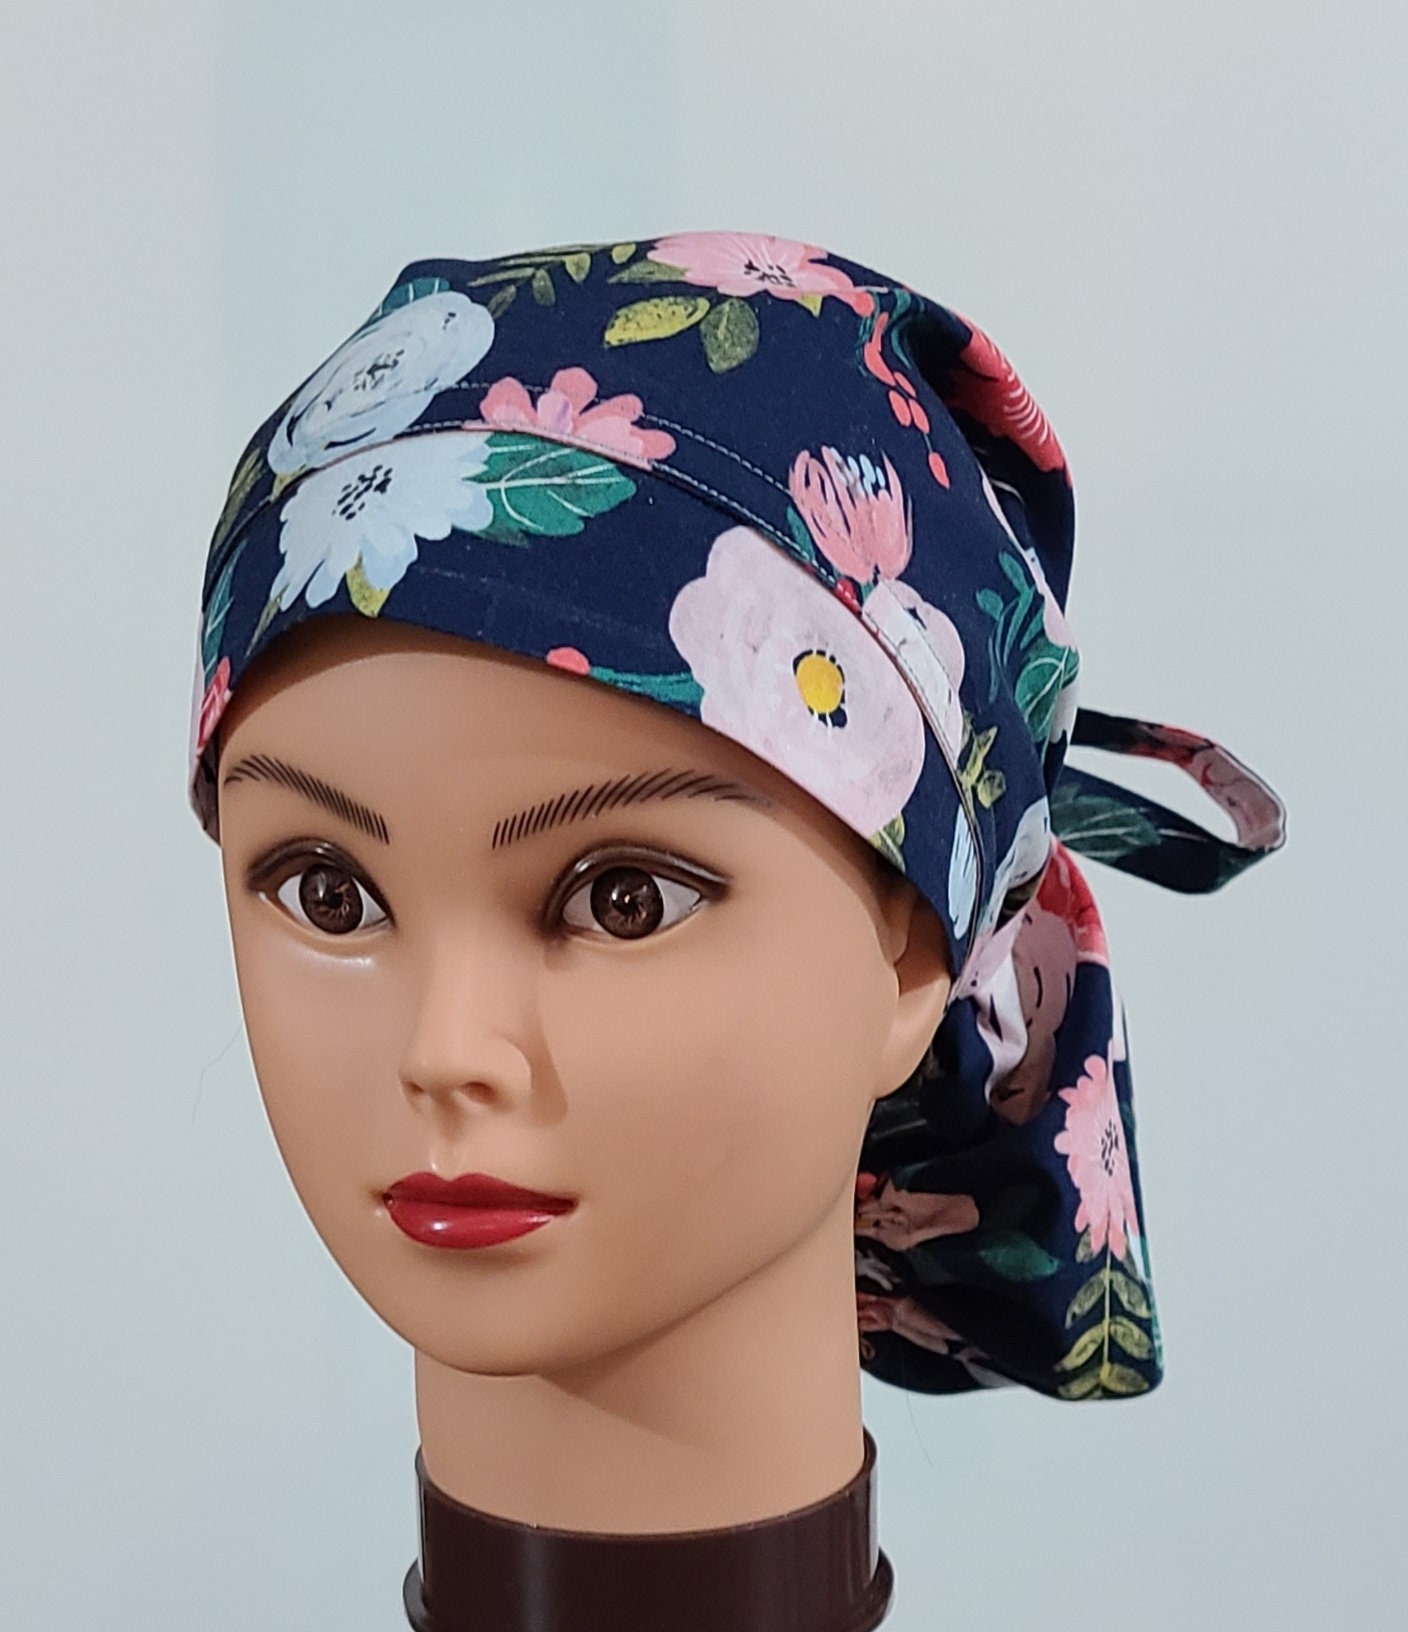 Satine Lined Scrub Hat Pink Blooms on Navy Scrub Cap Surgical | Etsy